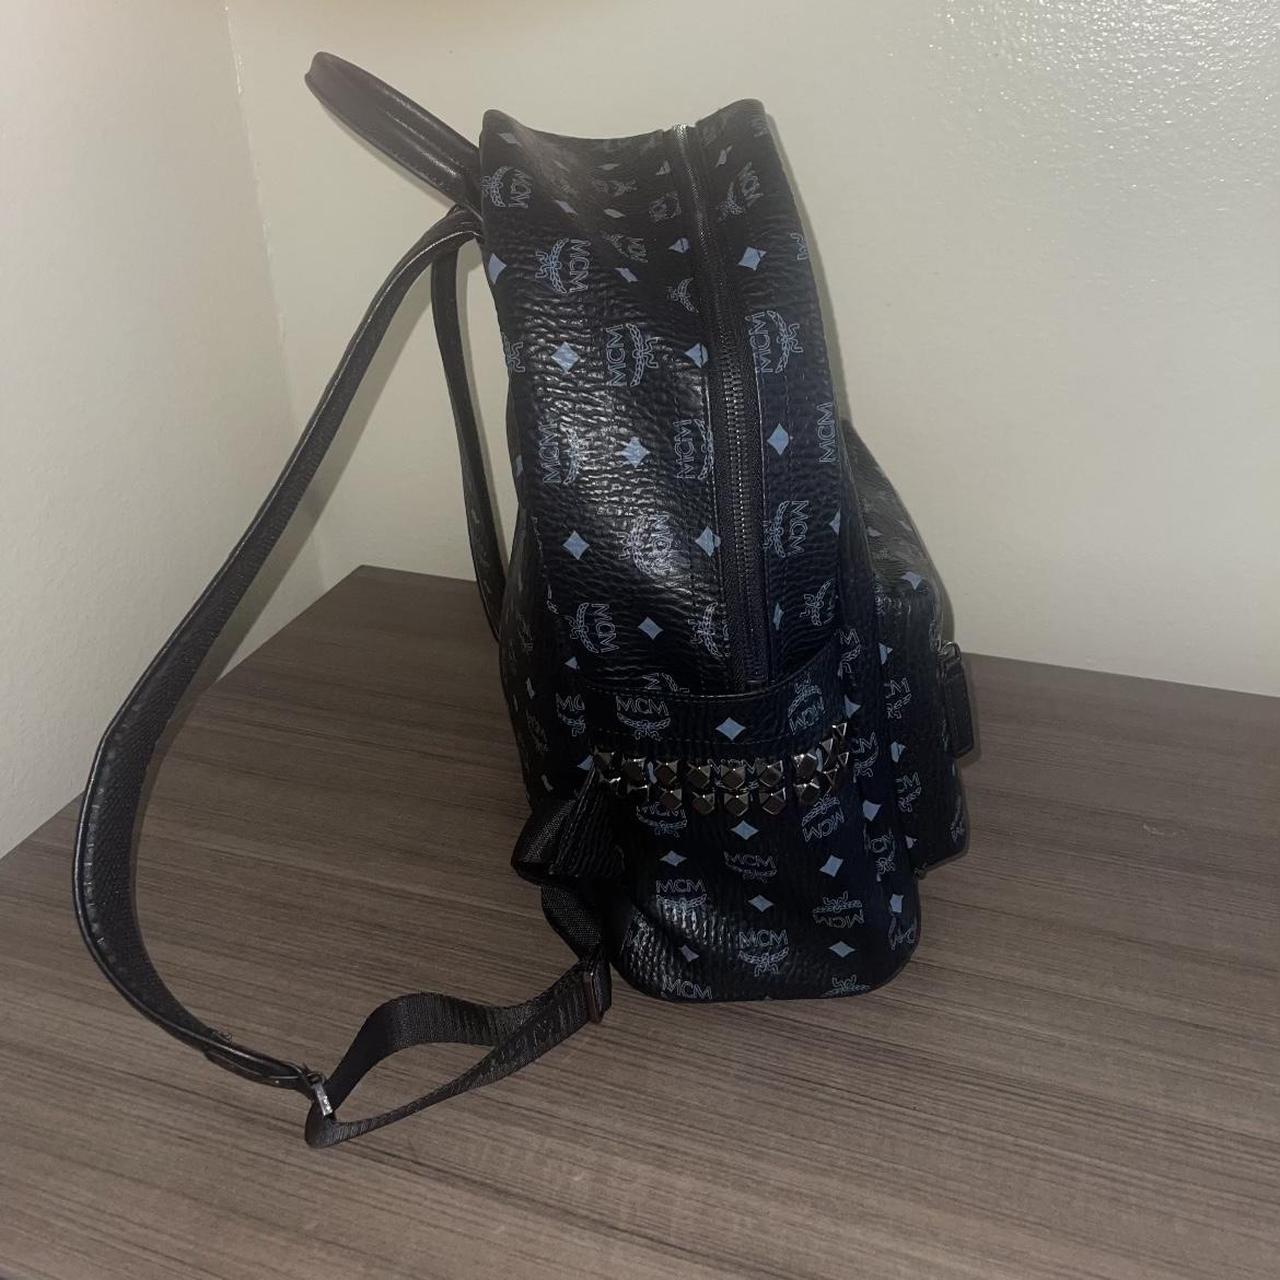 Unisex Rare Mcm Sidebag open to offers but no lowballs - Depop